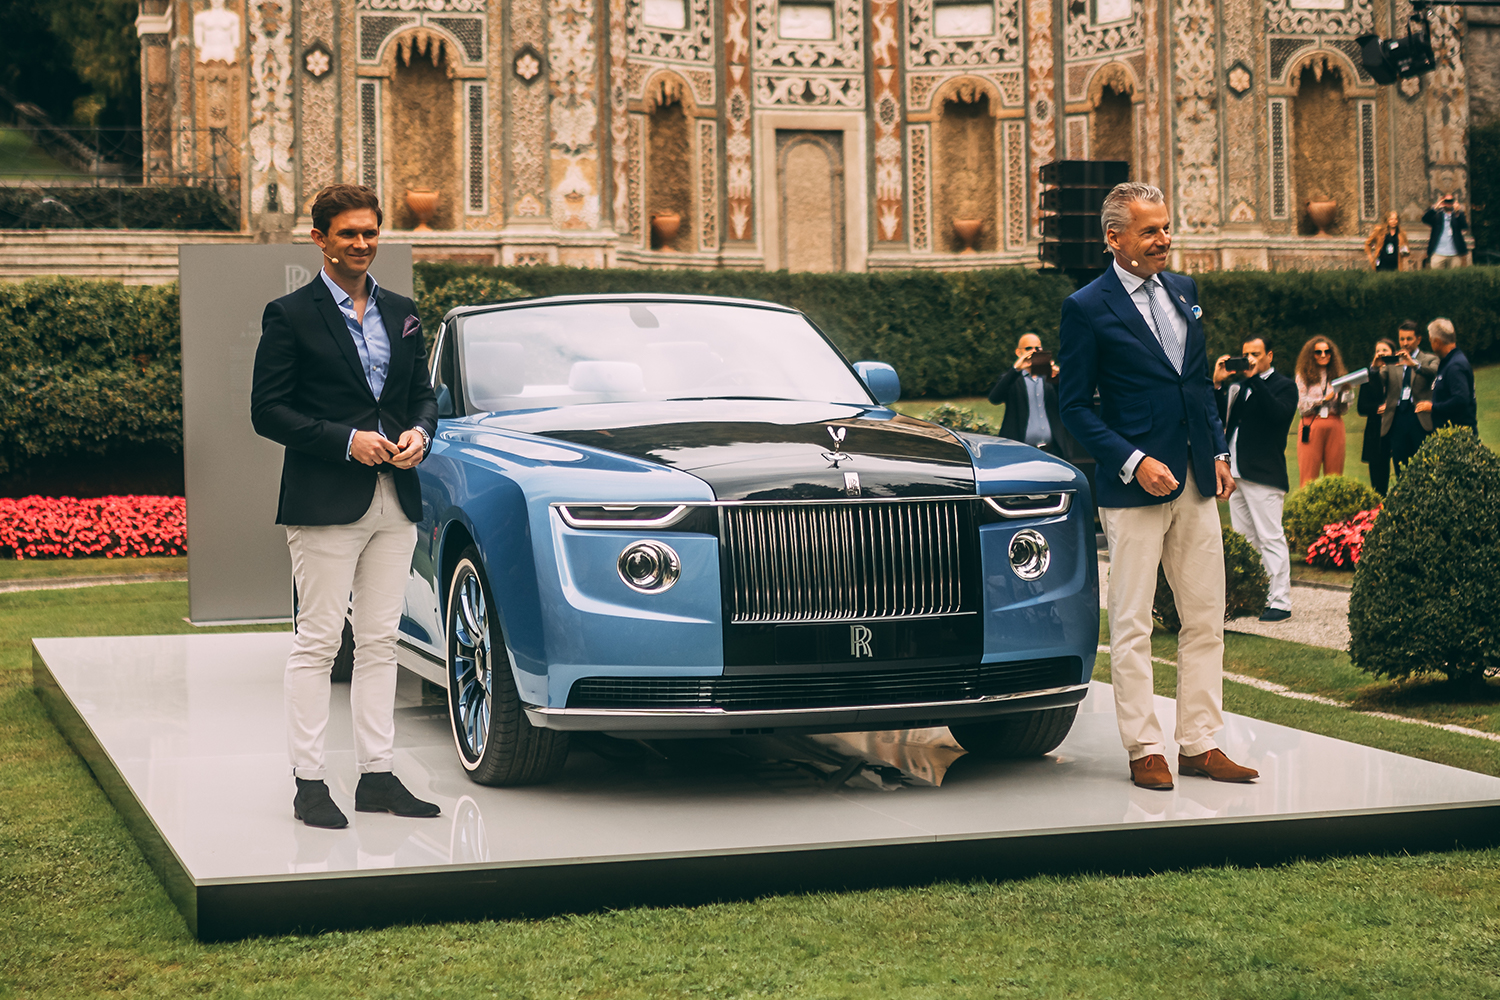 Alex Innes and Torsten Müller-Ötvös of Rolls-Royce revealing the Boat Tail model at the Villa d'Este Concorso d’Eleganza on the shores of Lake Como, Italy, in October 2021